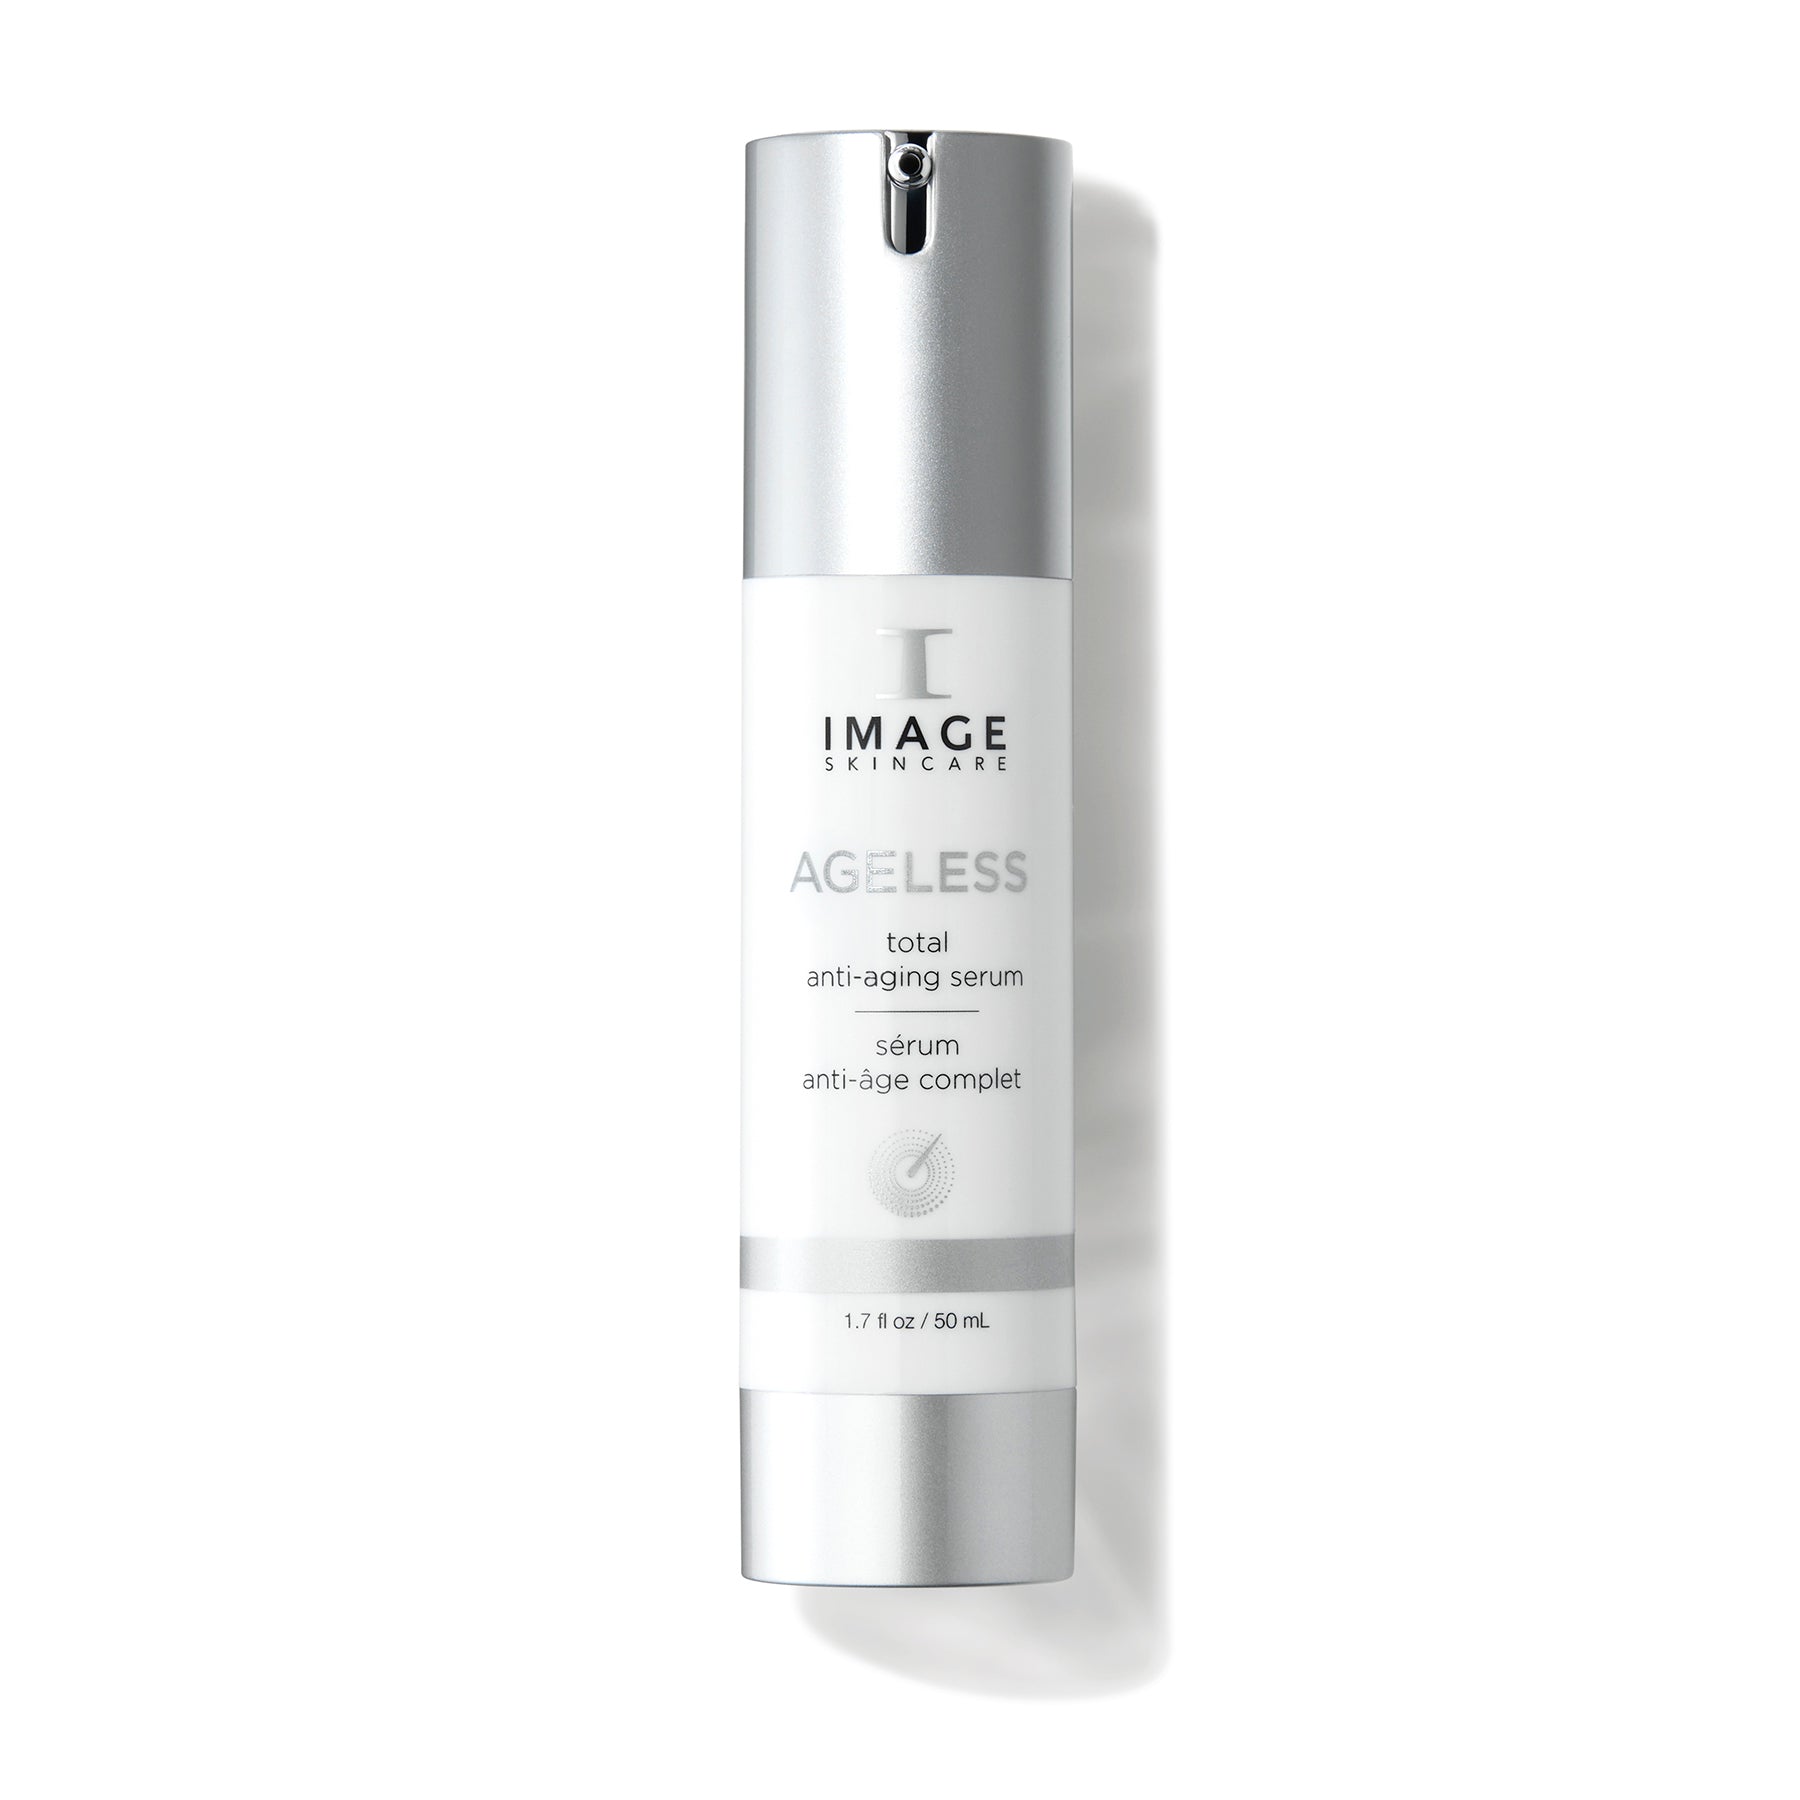 AGELESS total anti-ageing serum with plant stem cell technology